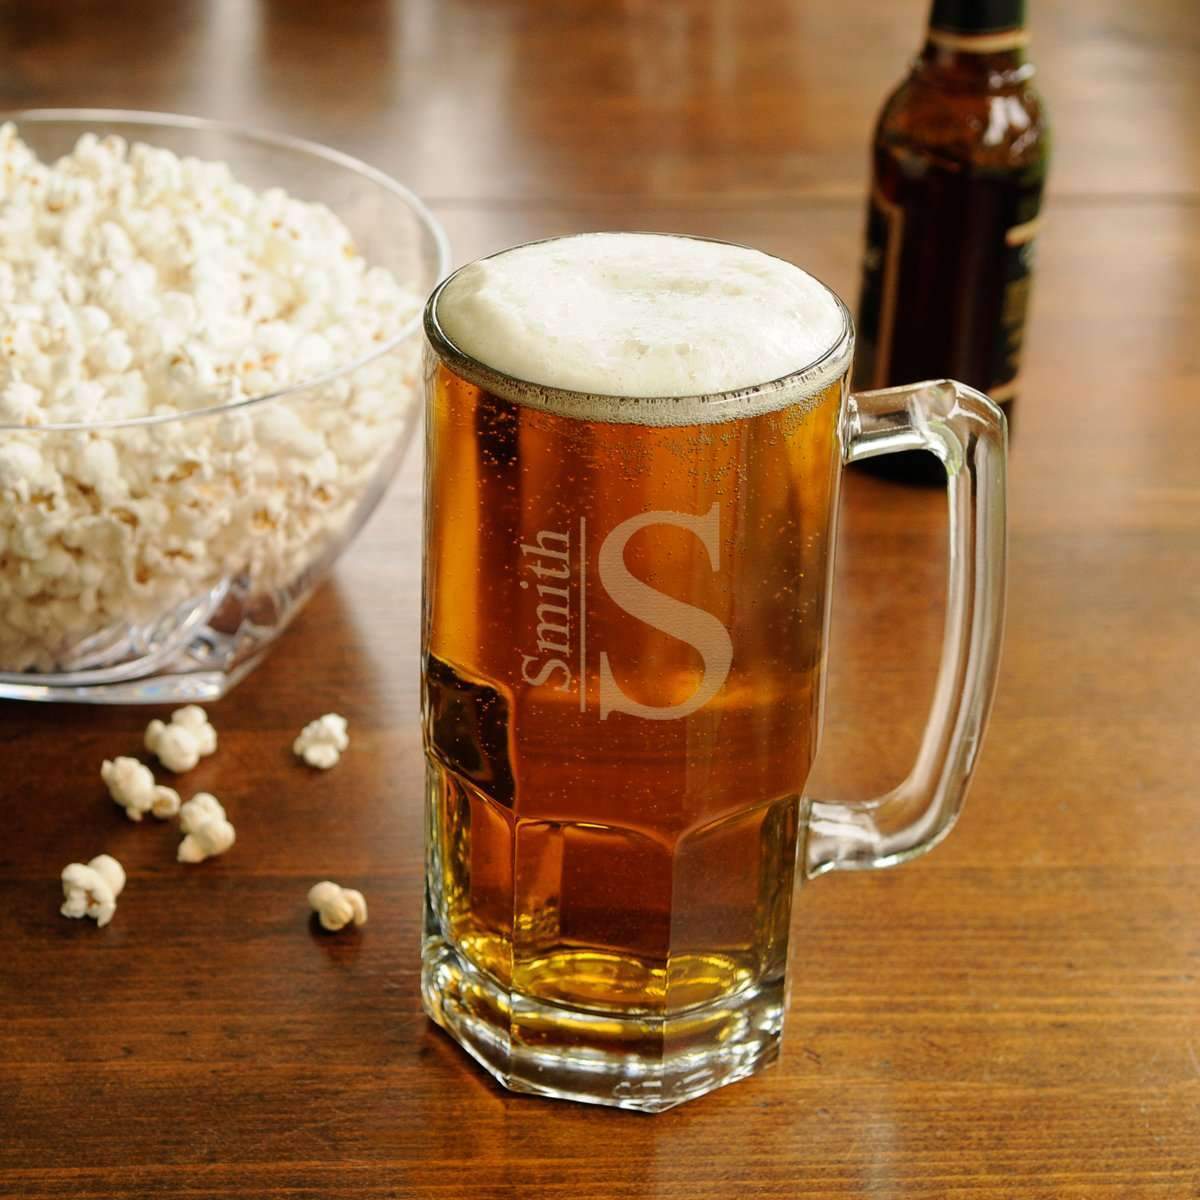 EXTRA Large Glass Mug Beer Handled 32 ounce 8 inches tall 4 inch rim